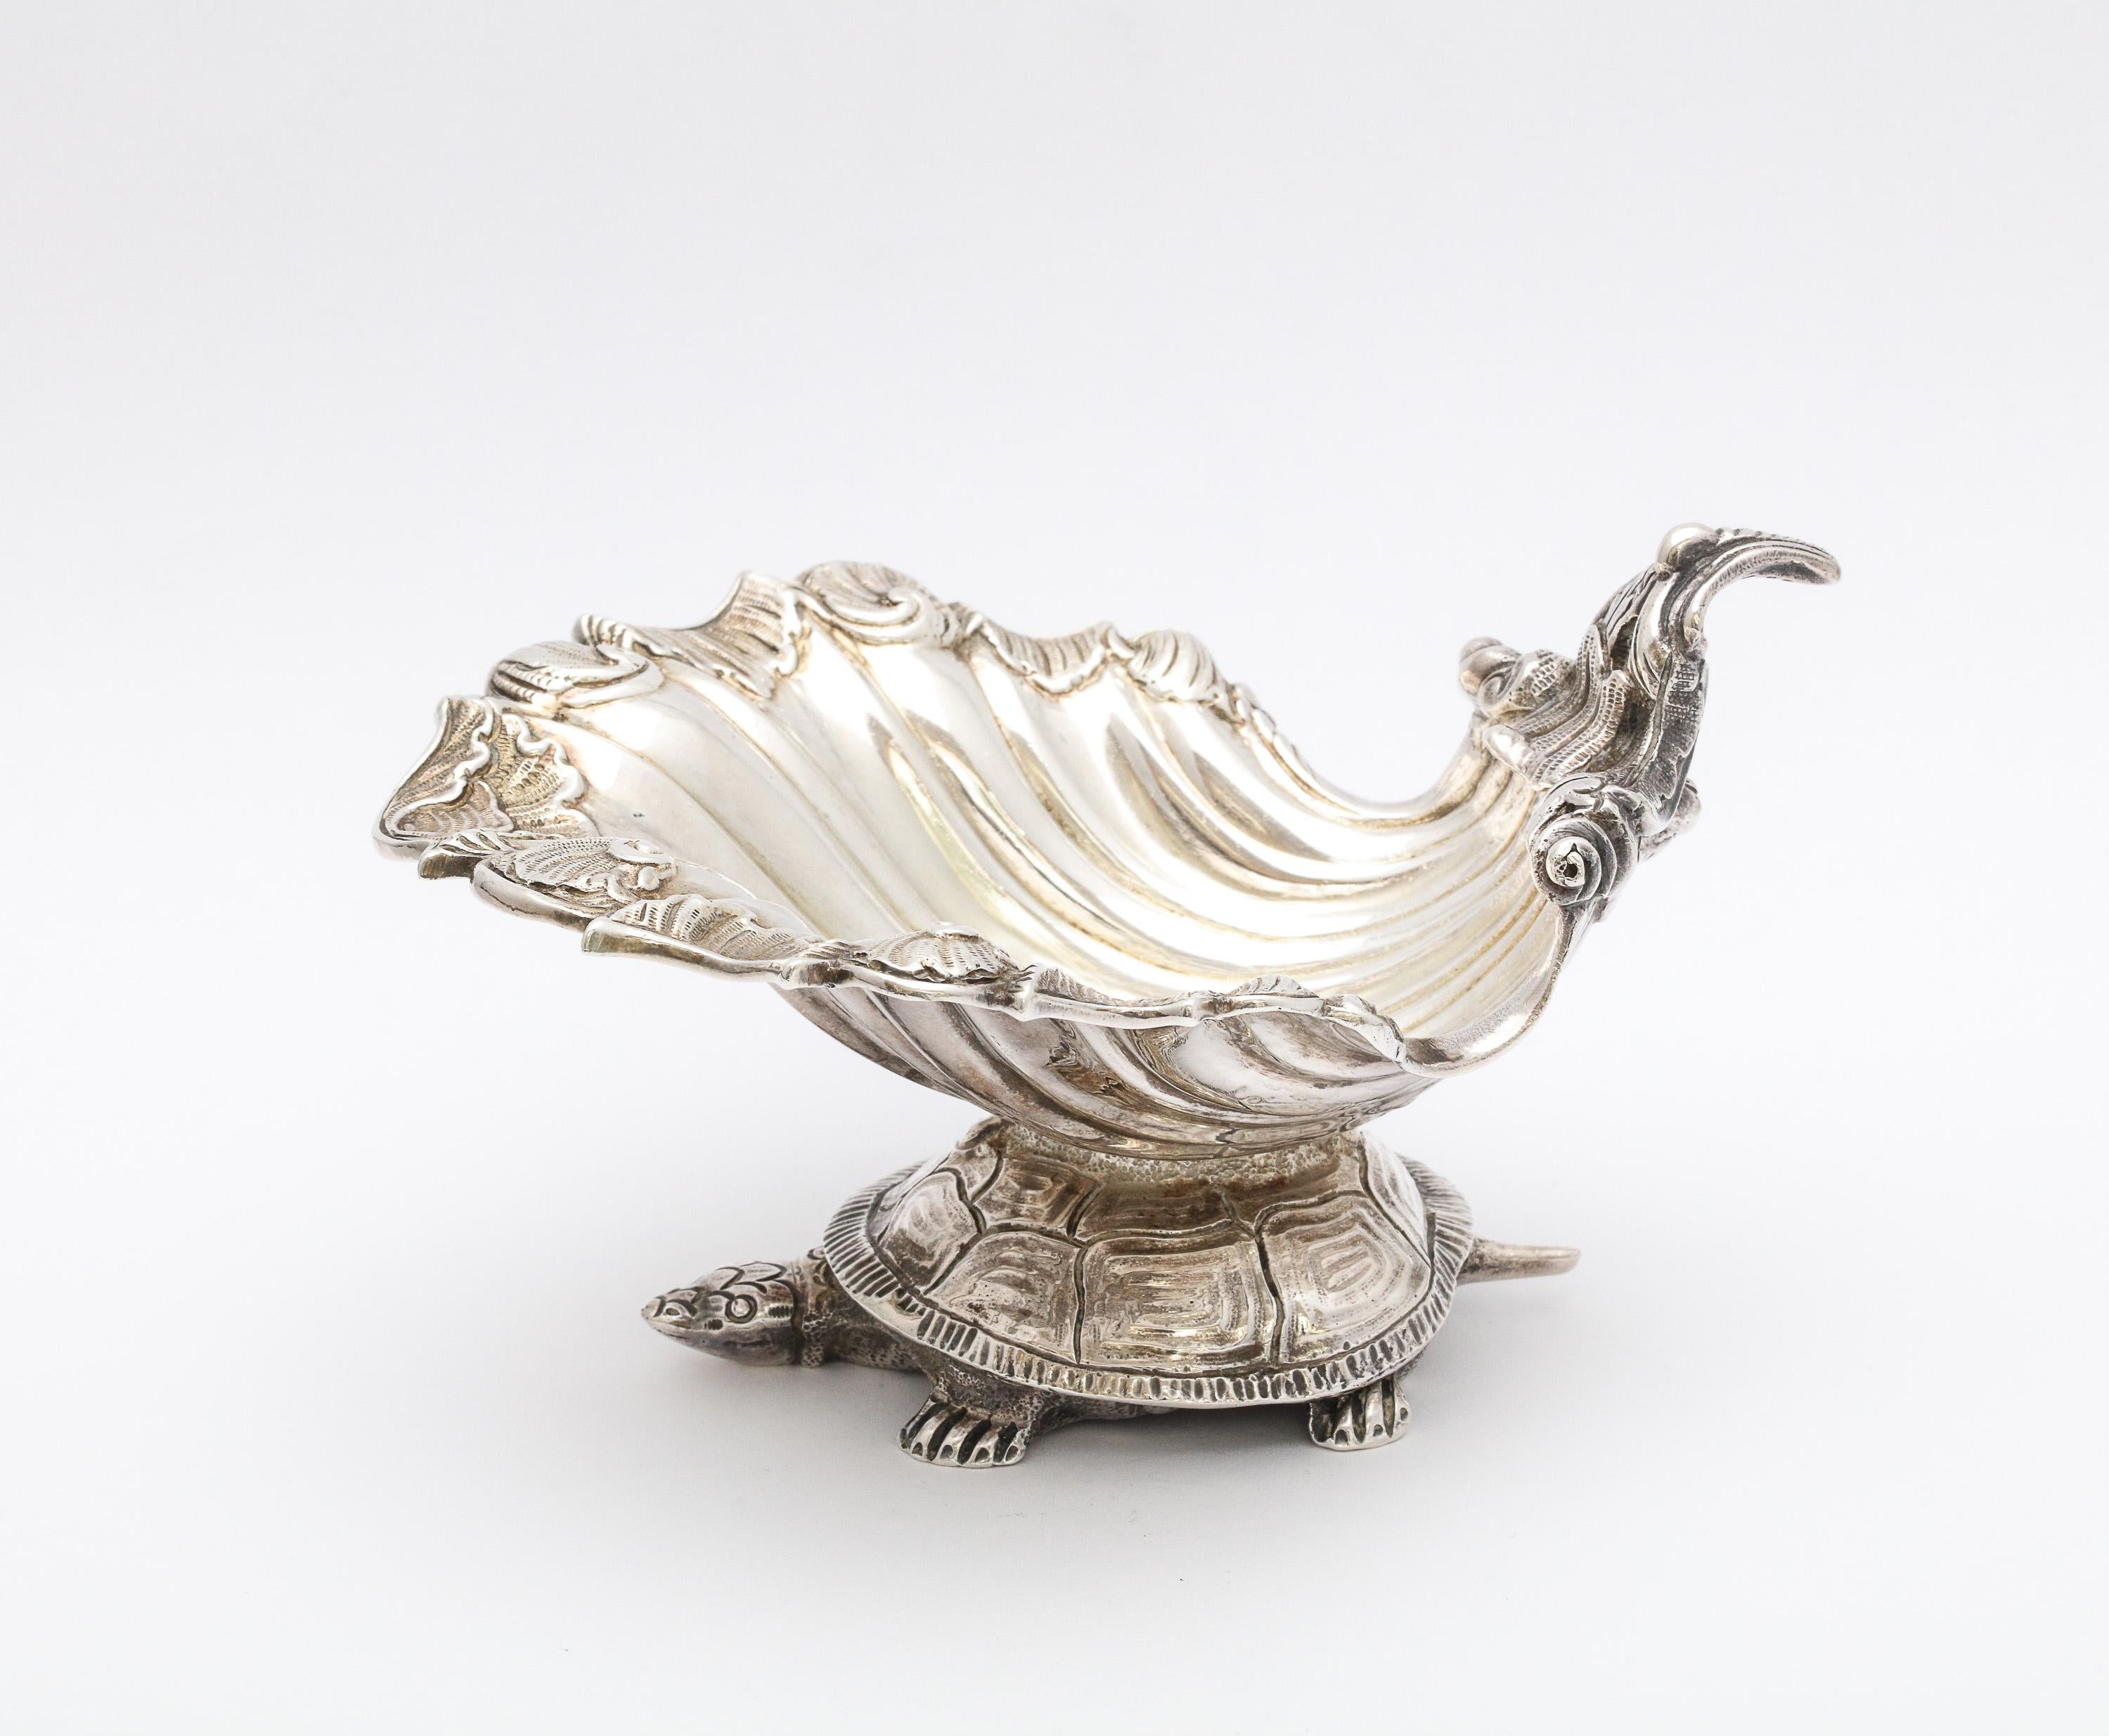 Large, Victorian, sterling silver salt cellar (that can be used as a sauce dish or trinkets dish) J.E. Caldwell and Co., Philadelphia, Pennsylvania, Ca. 1895. Salt cellar is in the form of a turtle as its base carrying a seashell on its back.